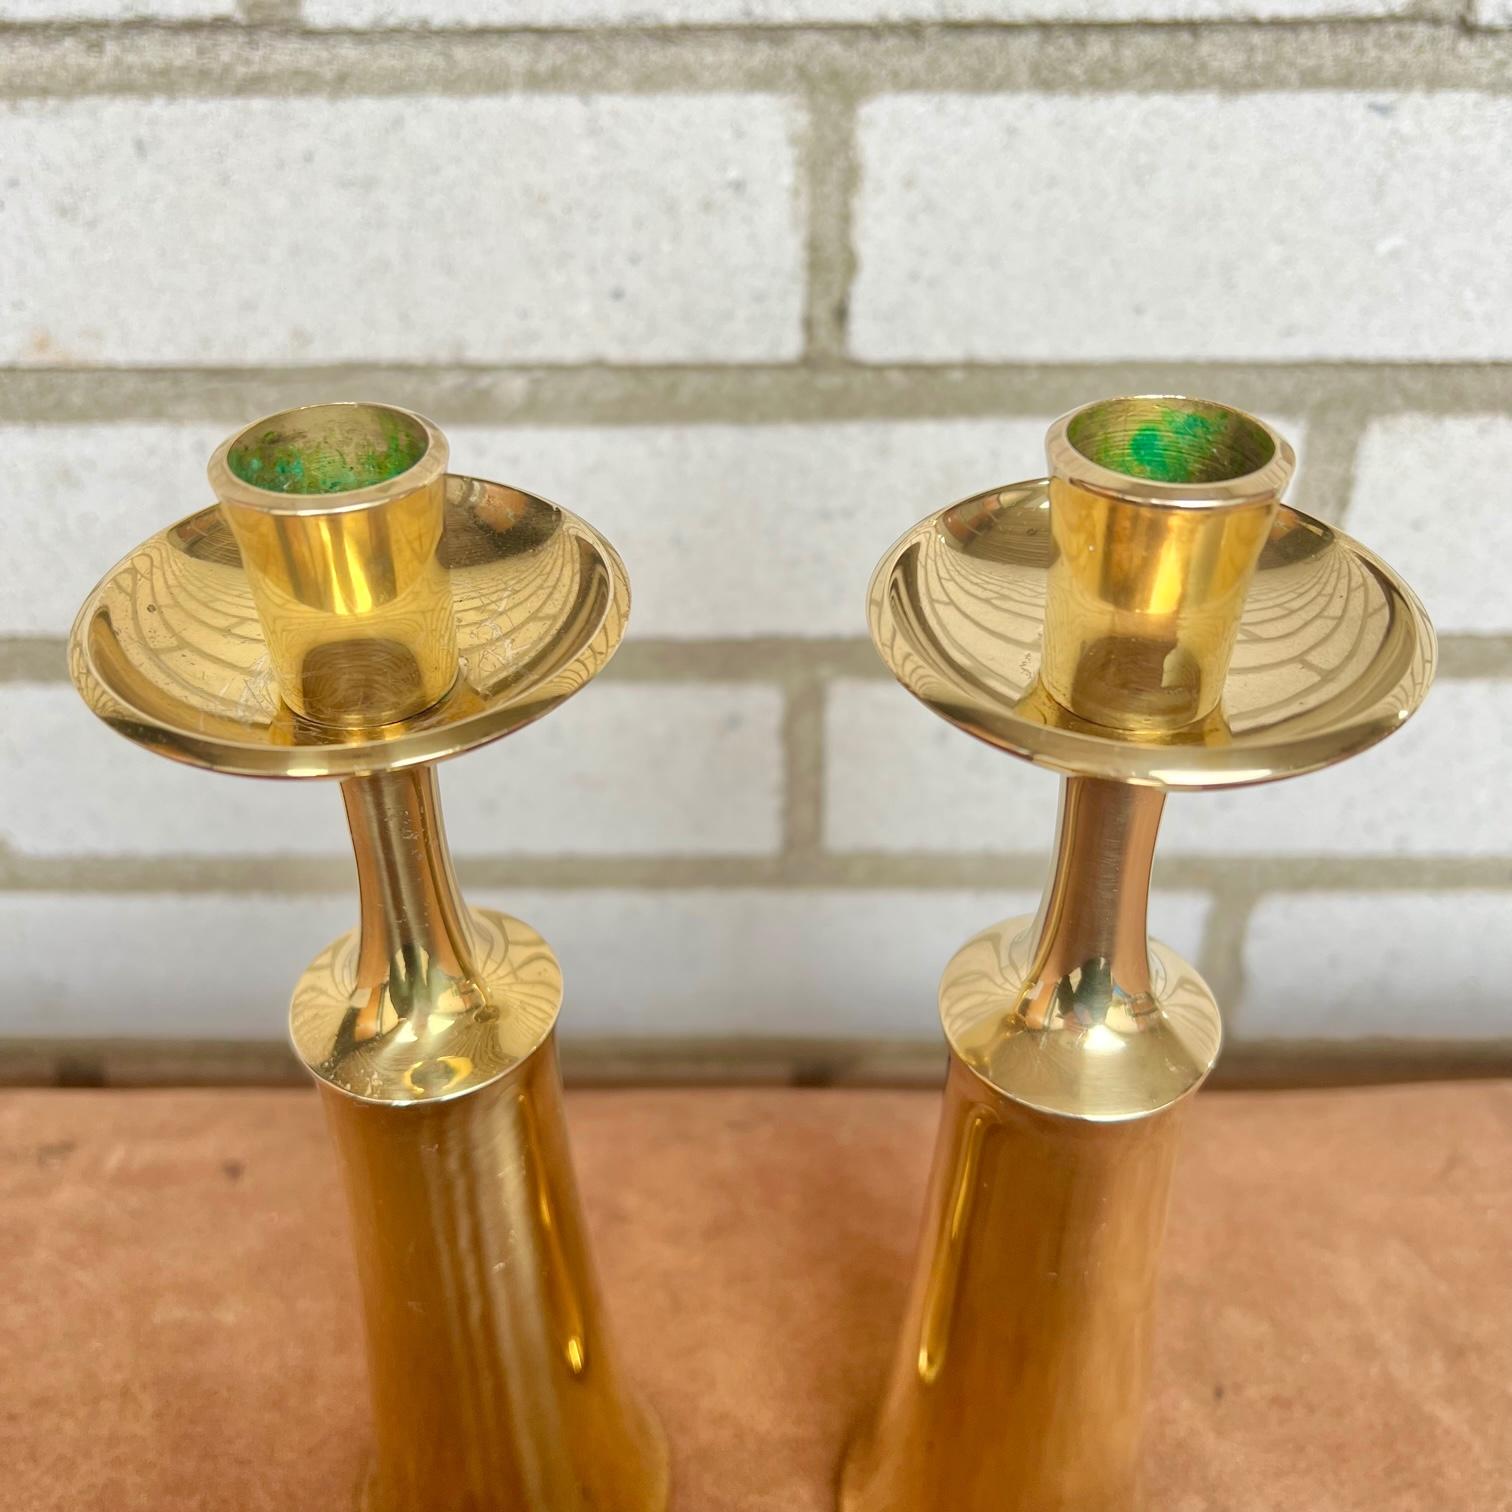 Candlesticks designed by Jens H. Quistgaard for Dansk Designs. Made In Denmark during the 1950s. Solid polished brass. The candlesticks are signed with hallmark. 

In vintage condition with some wear and patina.